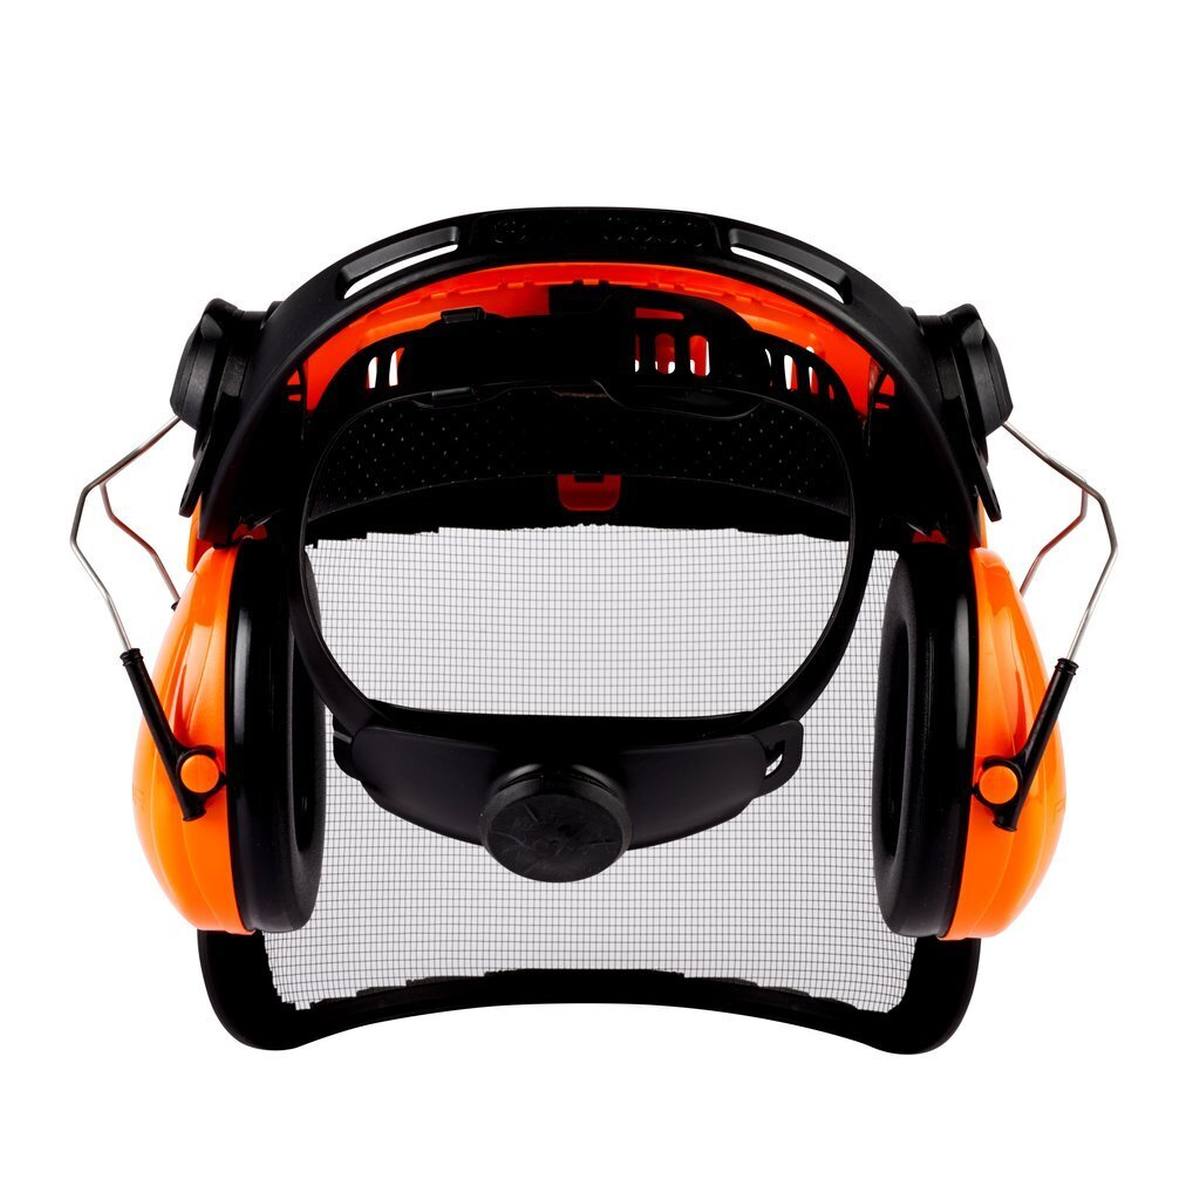 3M G500 Head protection combination G500V5CH510-OR Head holder - orange incl. ear muffs H510P3E, SNR=26 dB with visor 5C-1 stainless steel